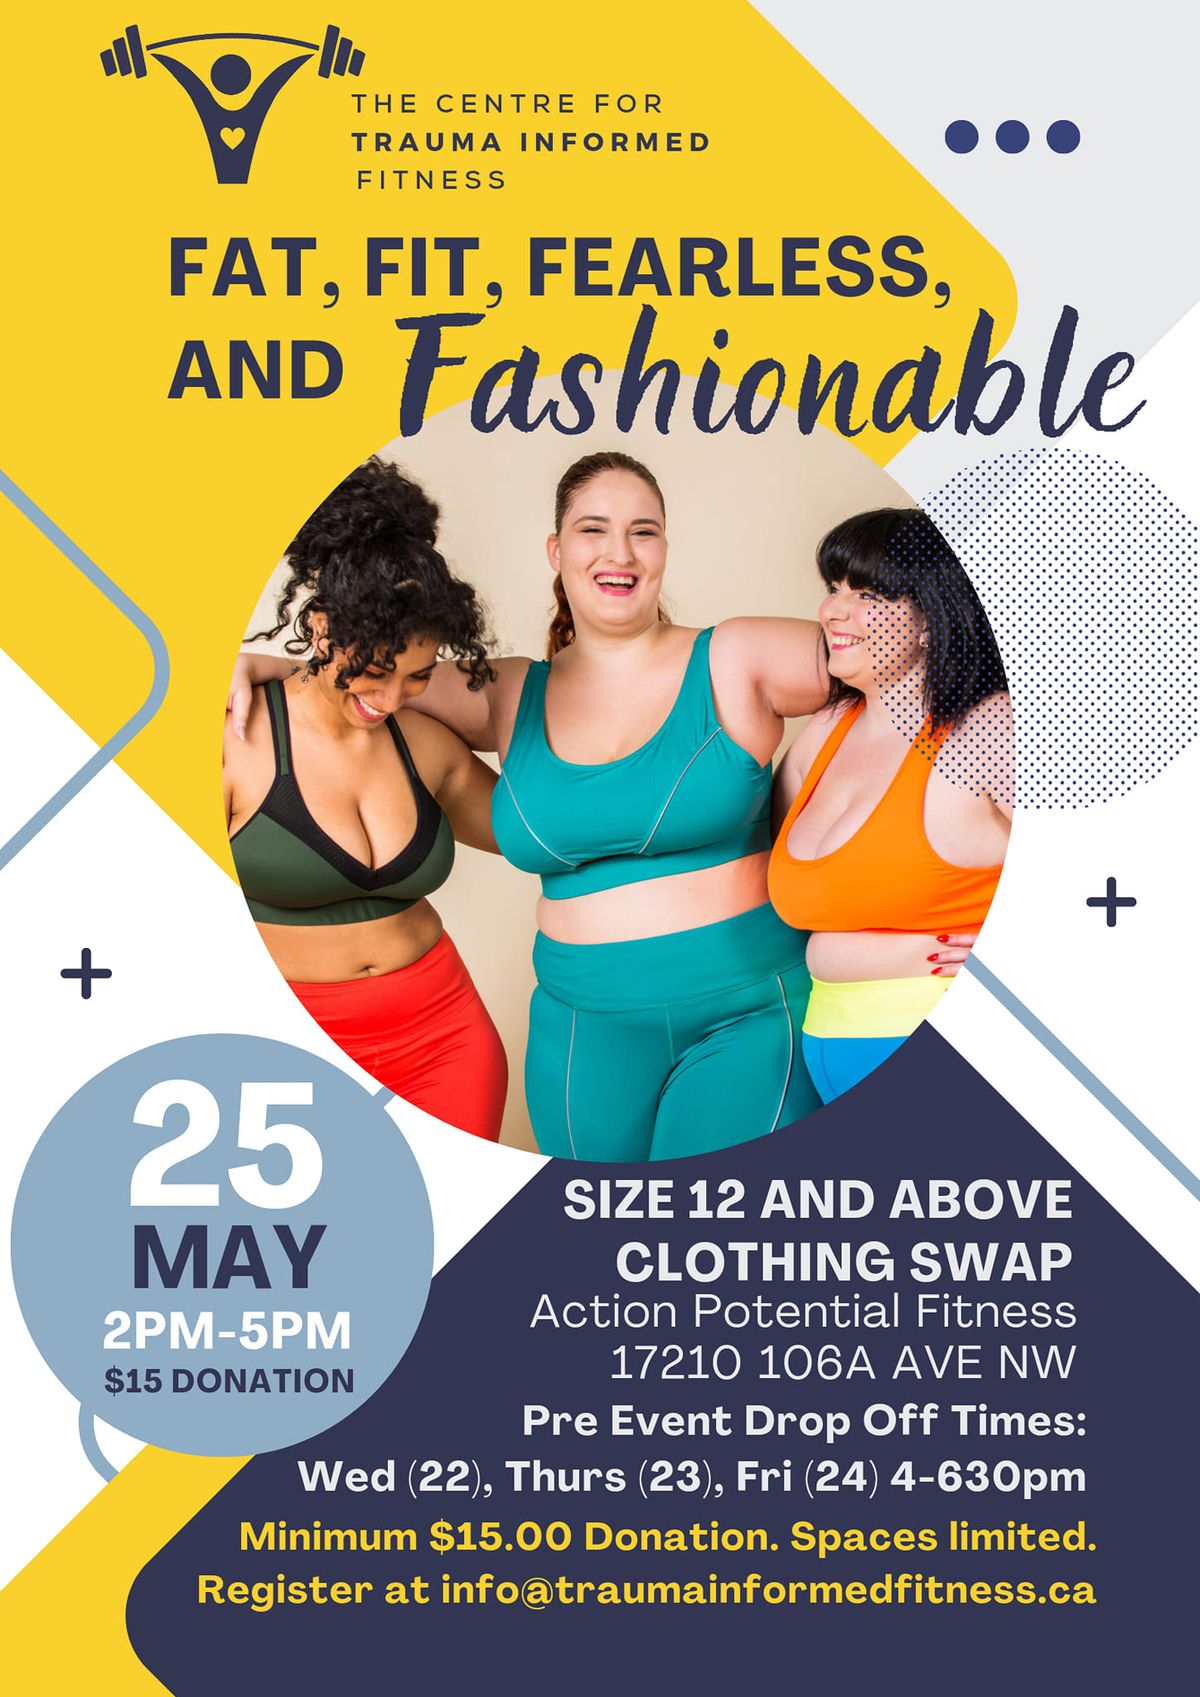 Fat, Fit, Fearless, and Fashionable Clothing Swap